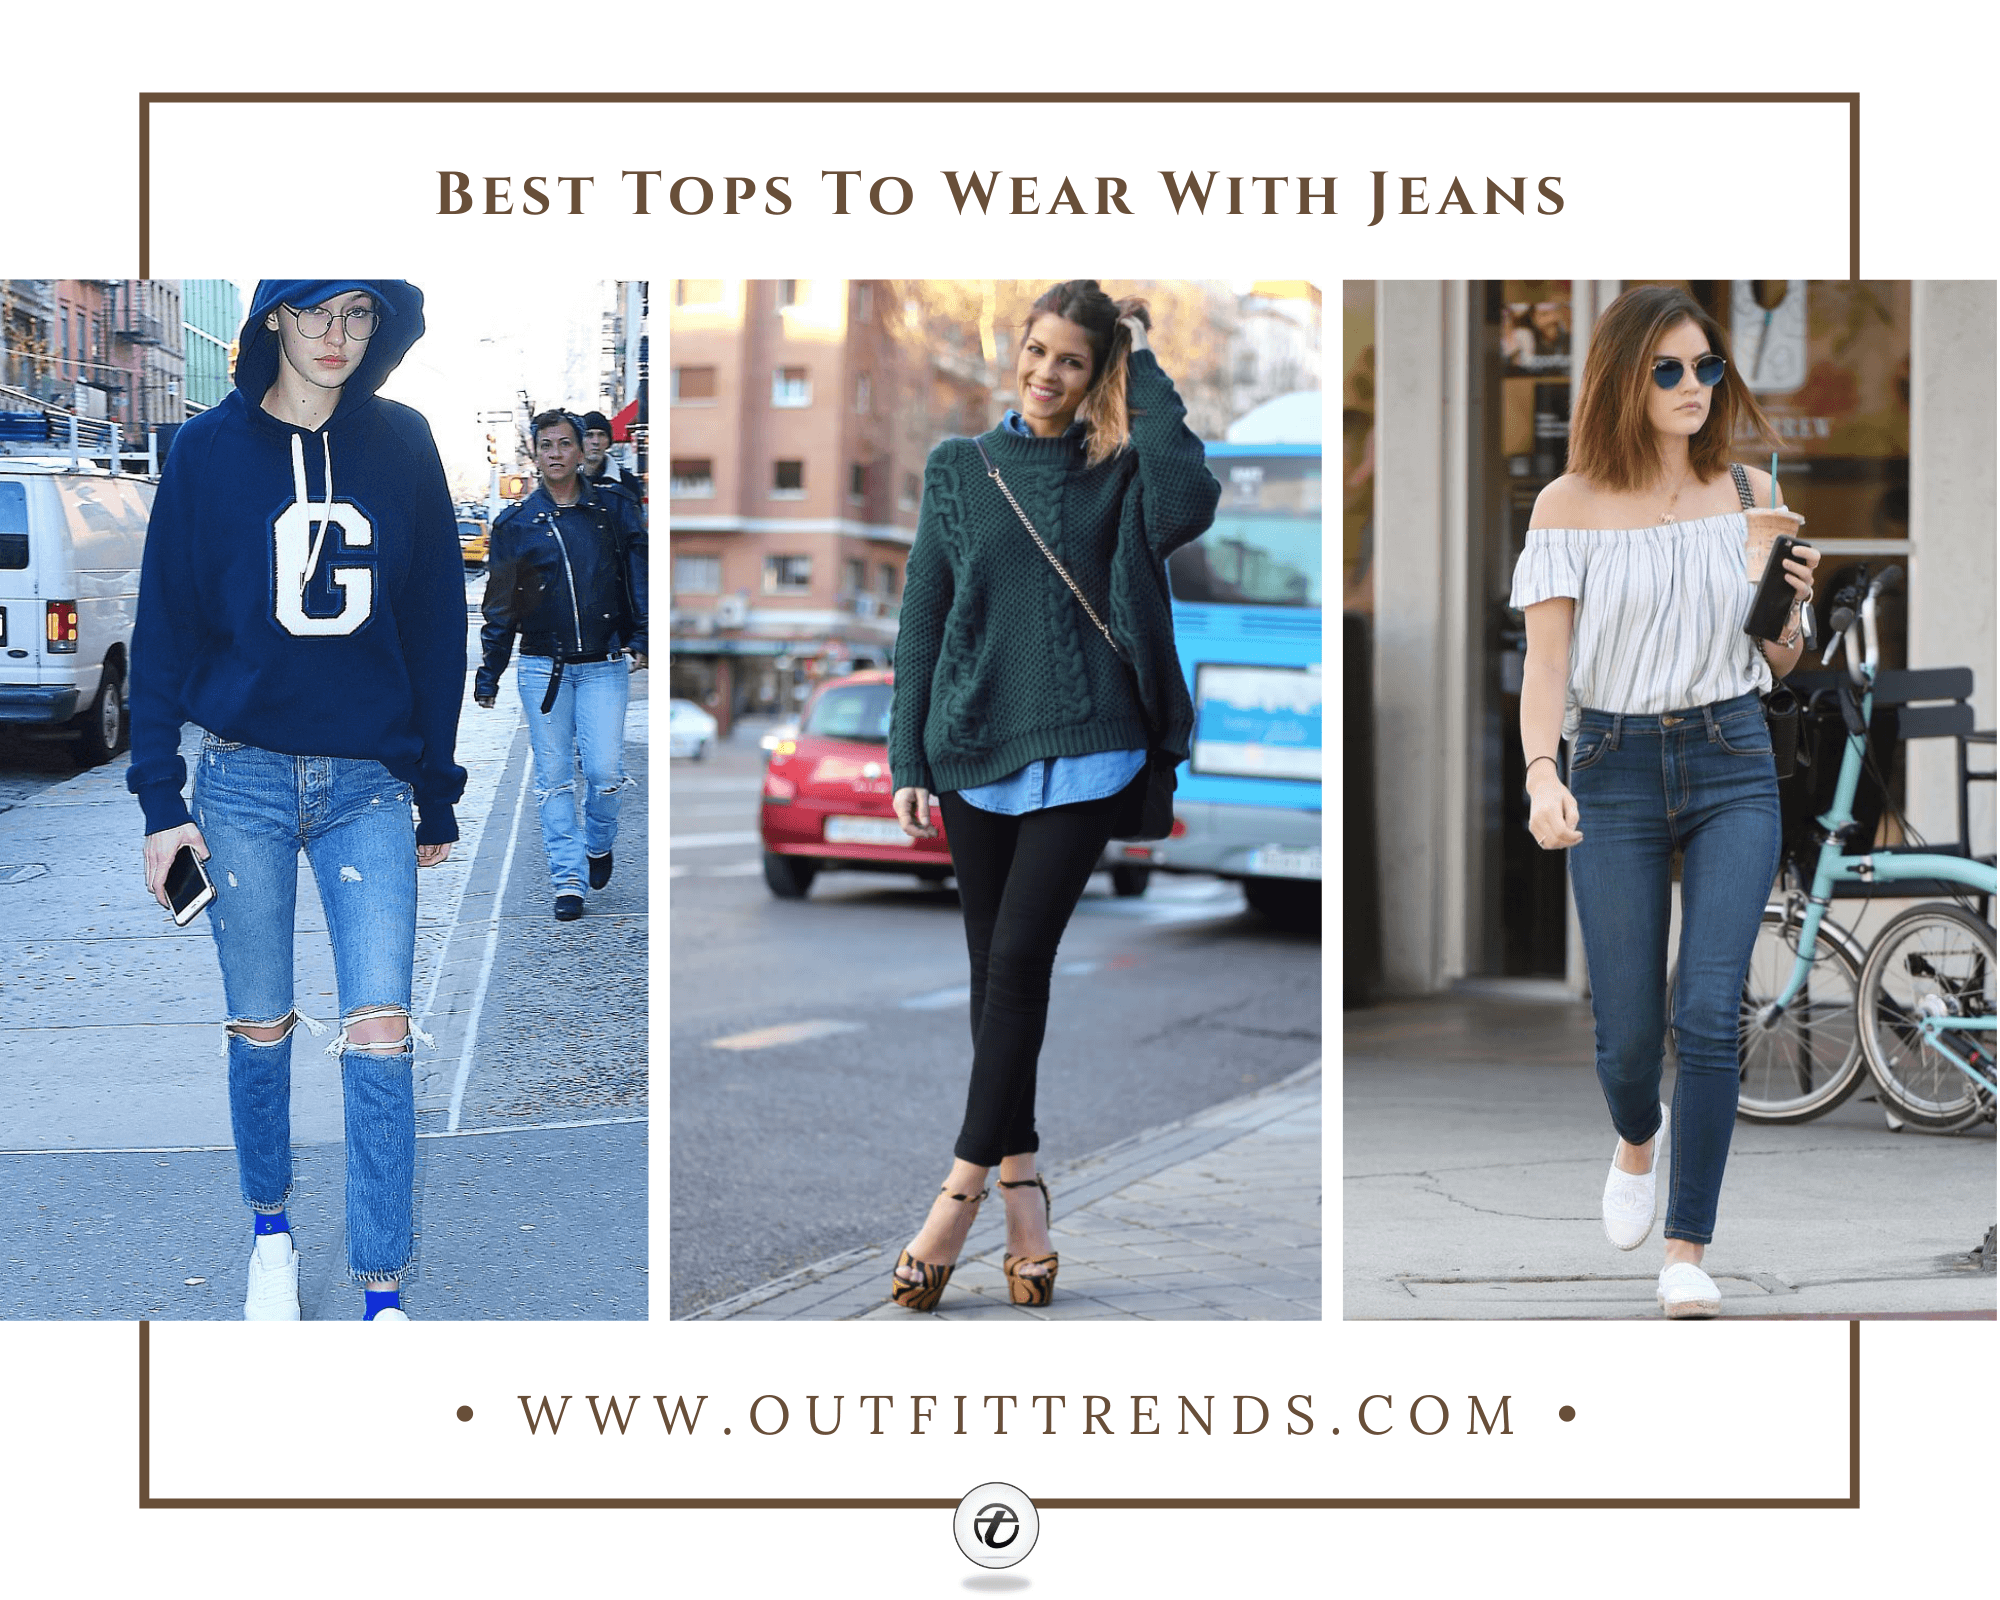 Best Tops to Wear with Jeans | 24 Jeans & Tops Outfit Ideas